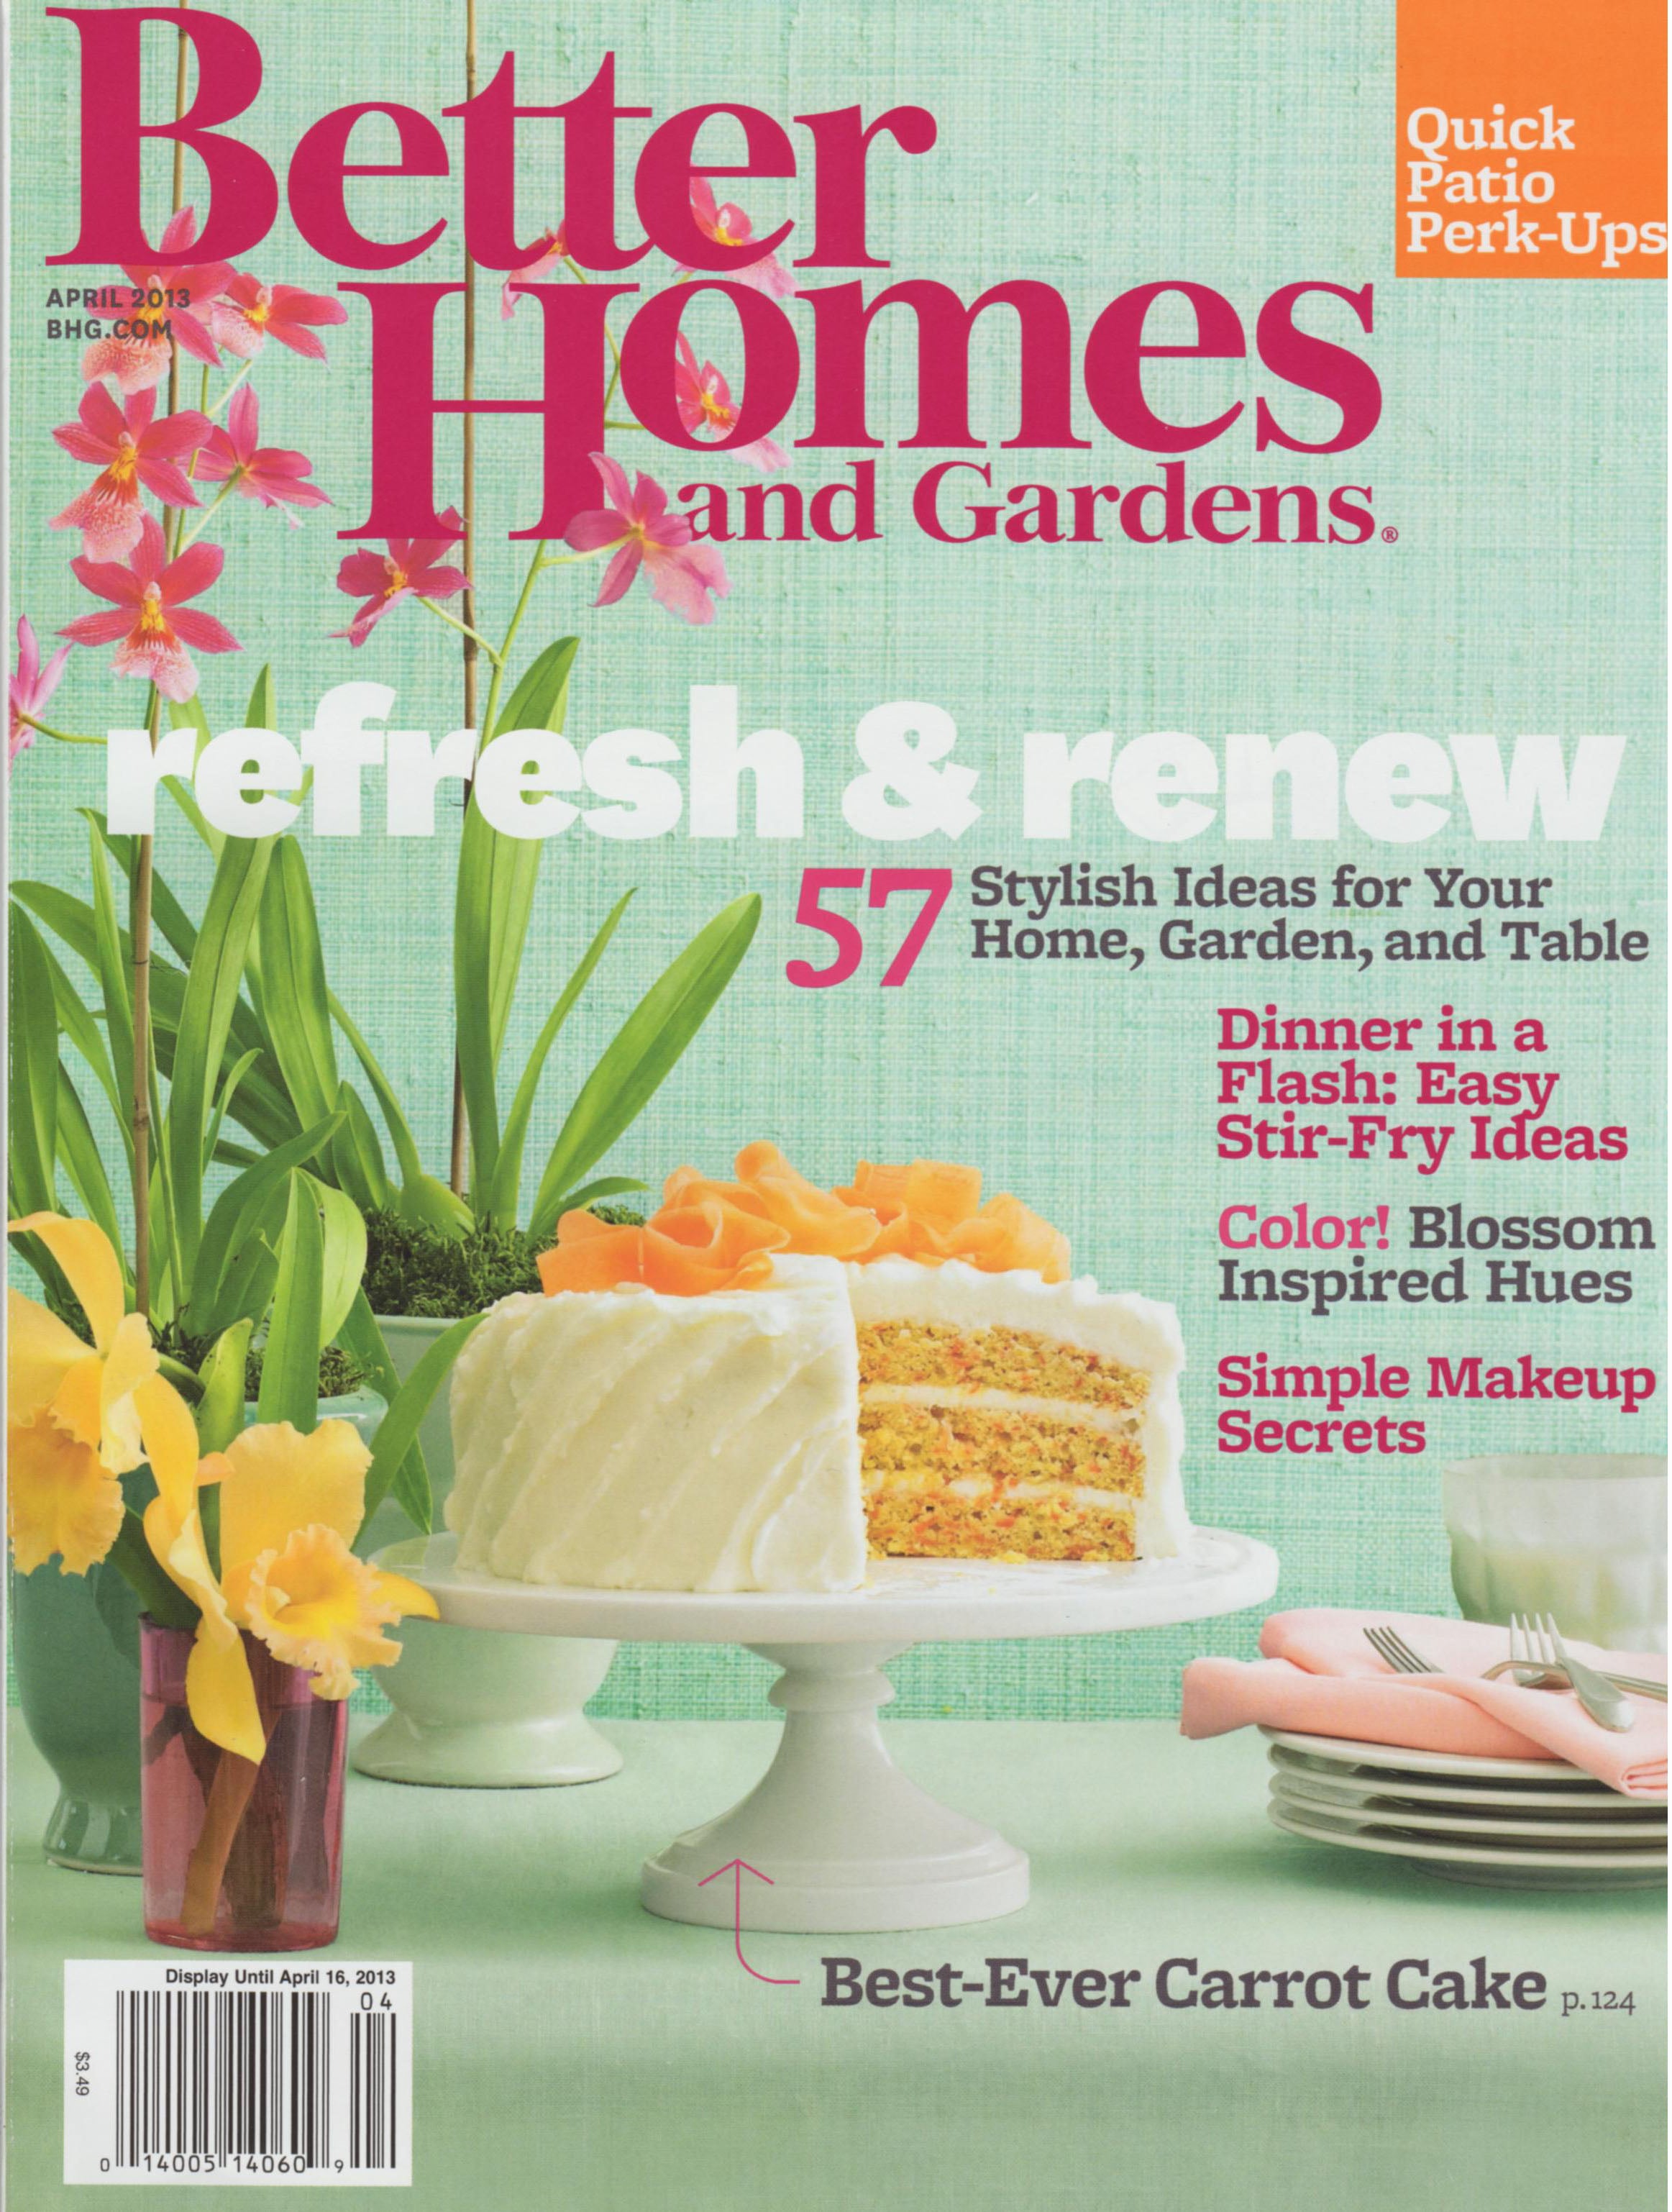 Find Us In Better Homes And Gardens Well Blended J Ryan Duffey